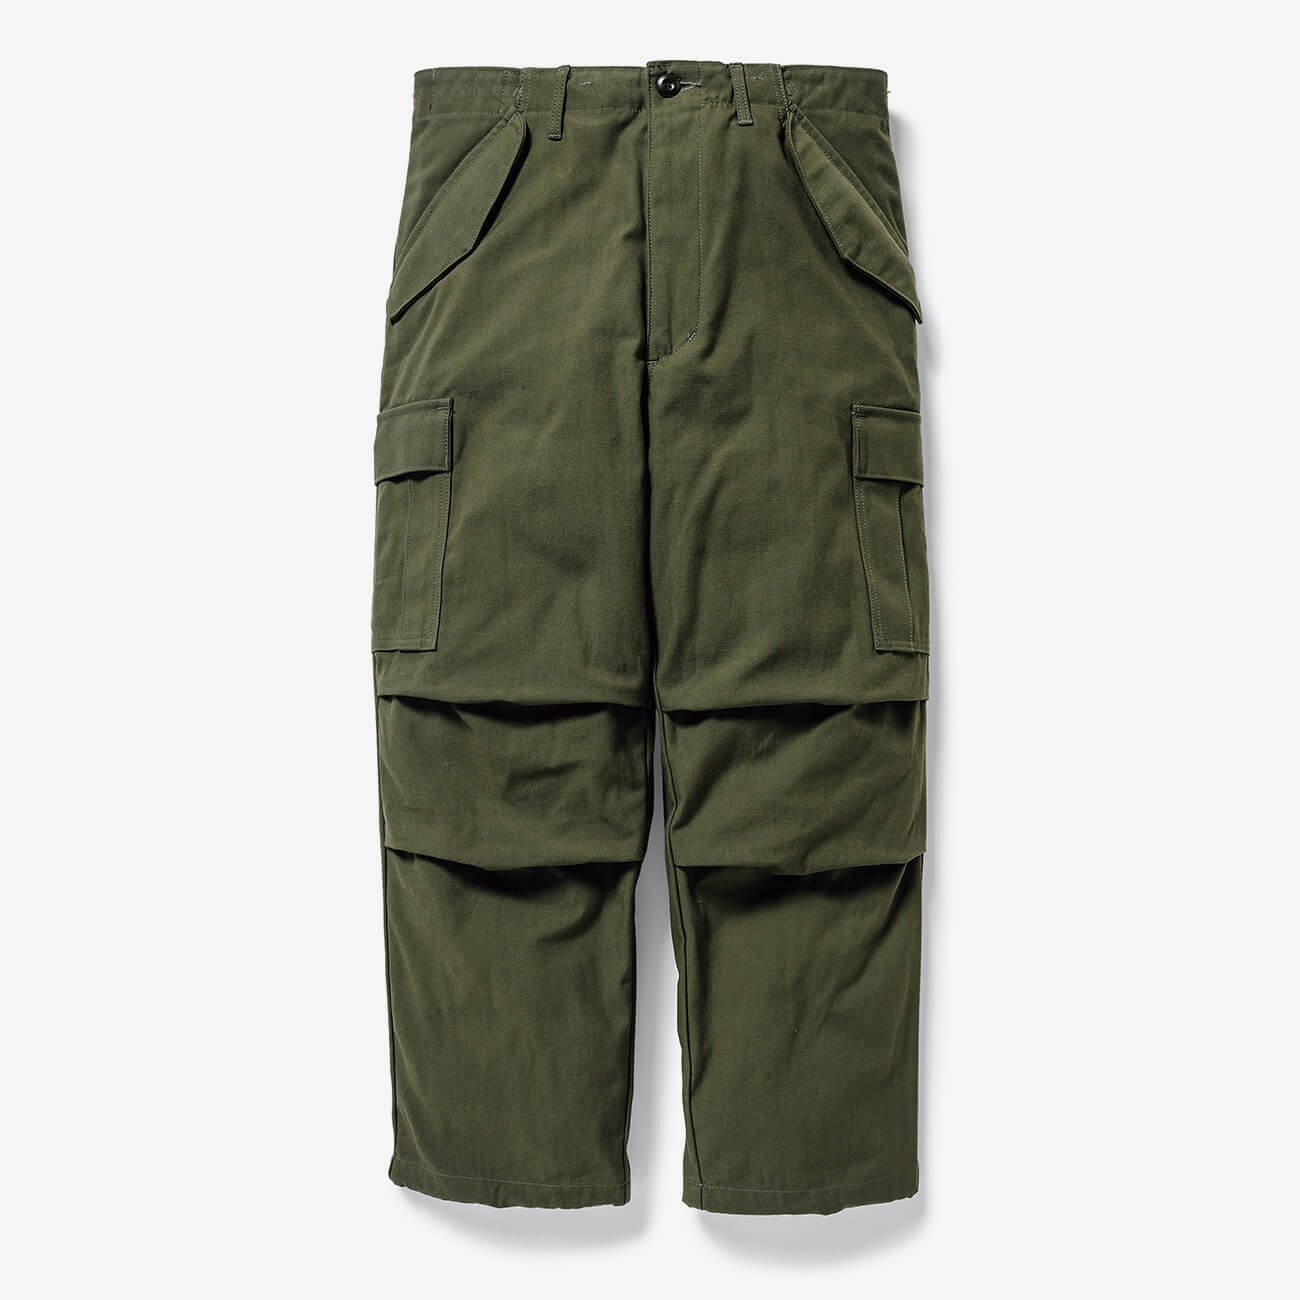 WTAPS WMILL-65 TROUSER / TROUSERS. NYCO. SATIN REVIEW | FASHION LAB